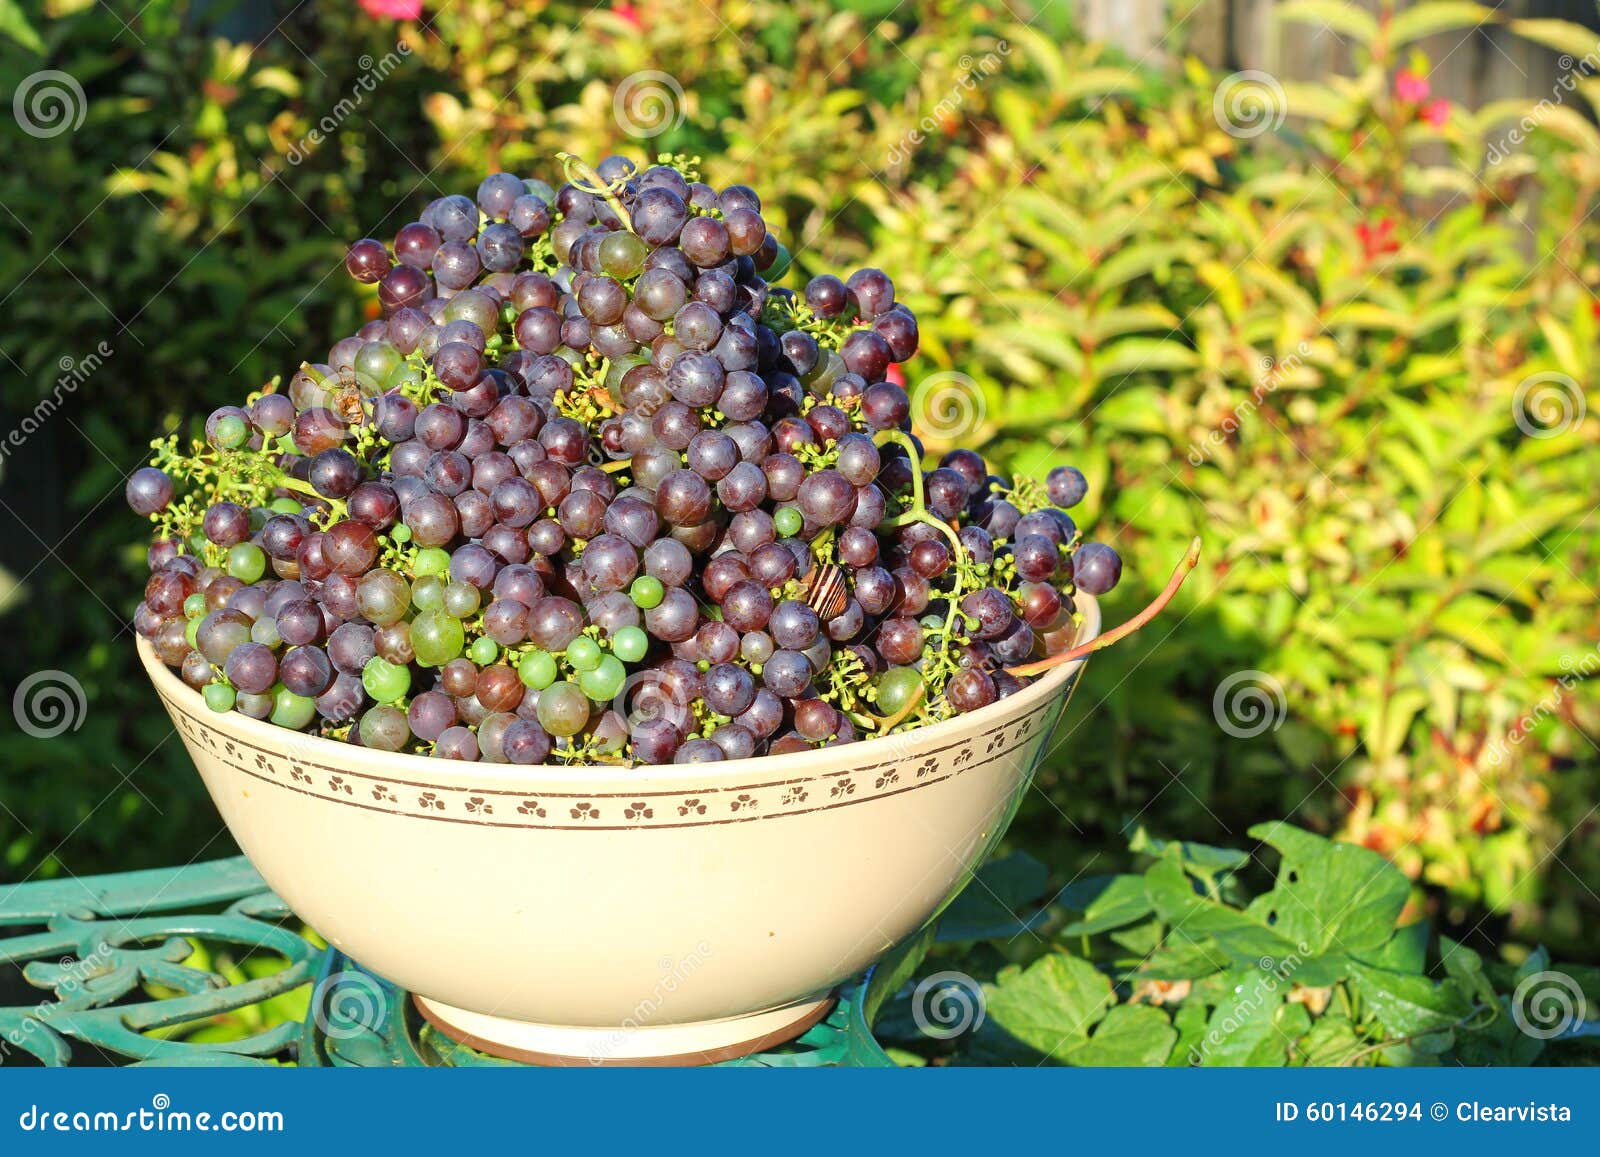 large amount of black grapes in a bowl.